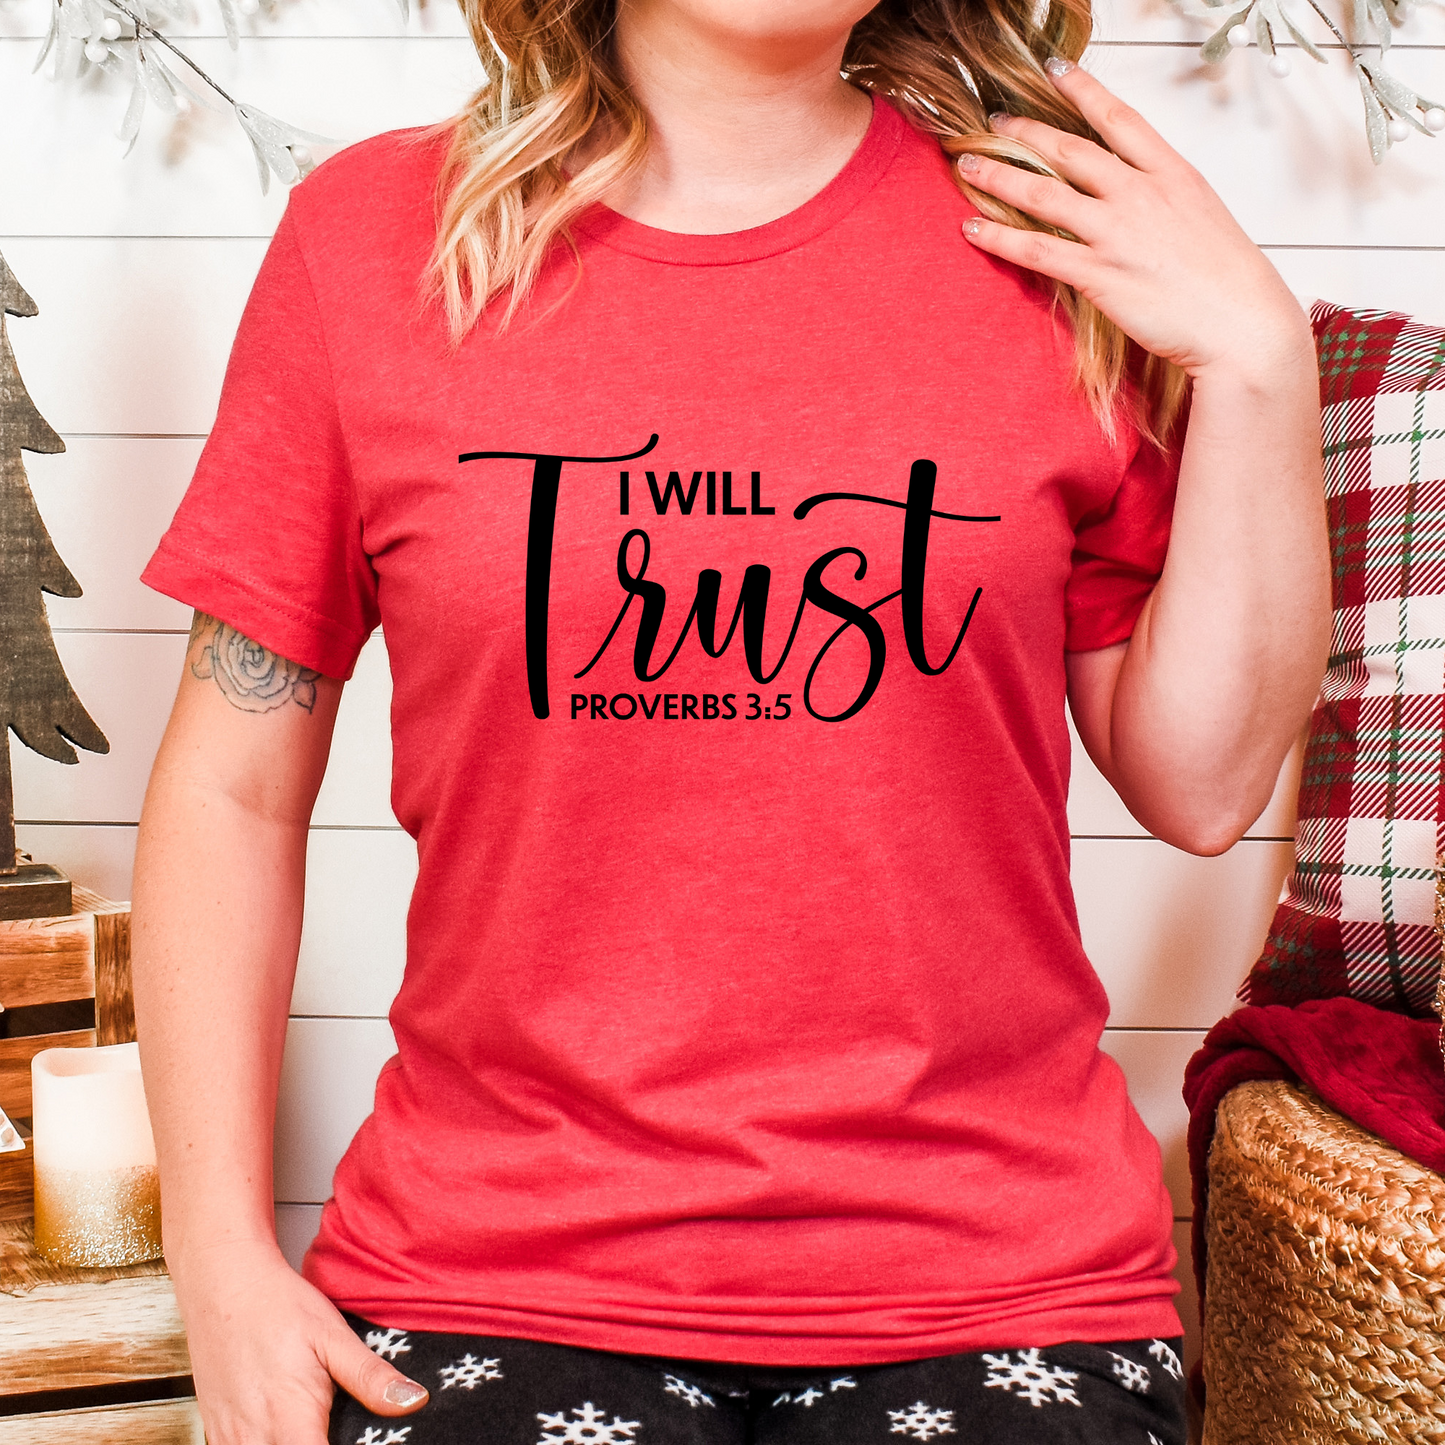 I Will Trust in the Lord Proverbs 3:5 V Neck Graphic